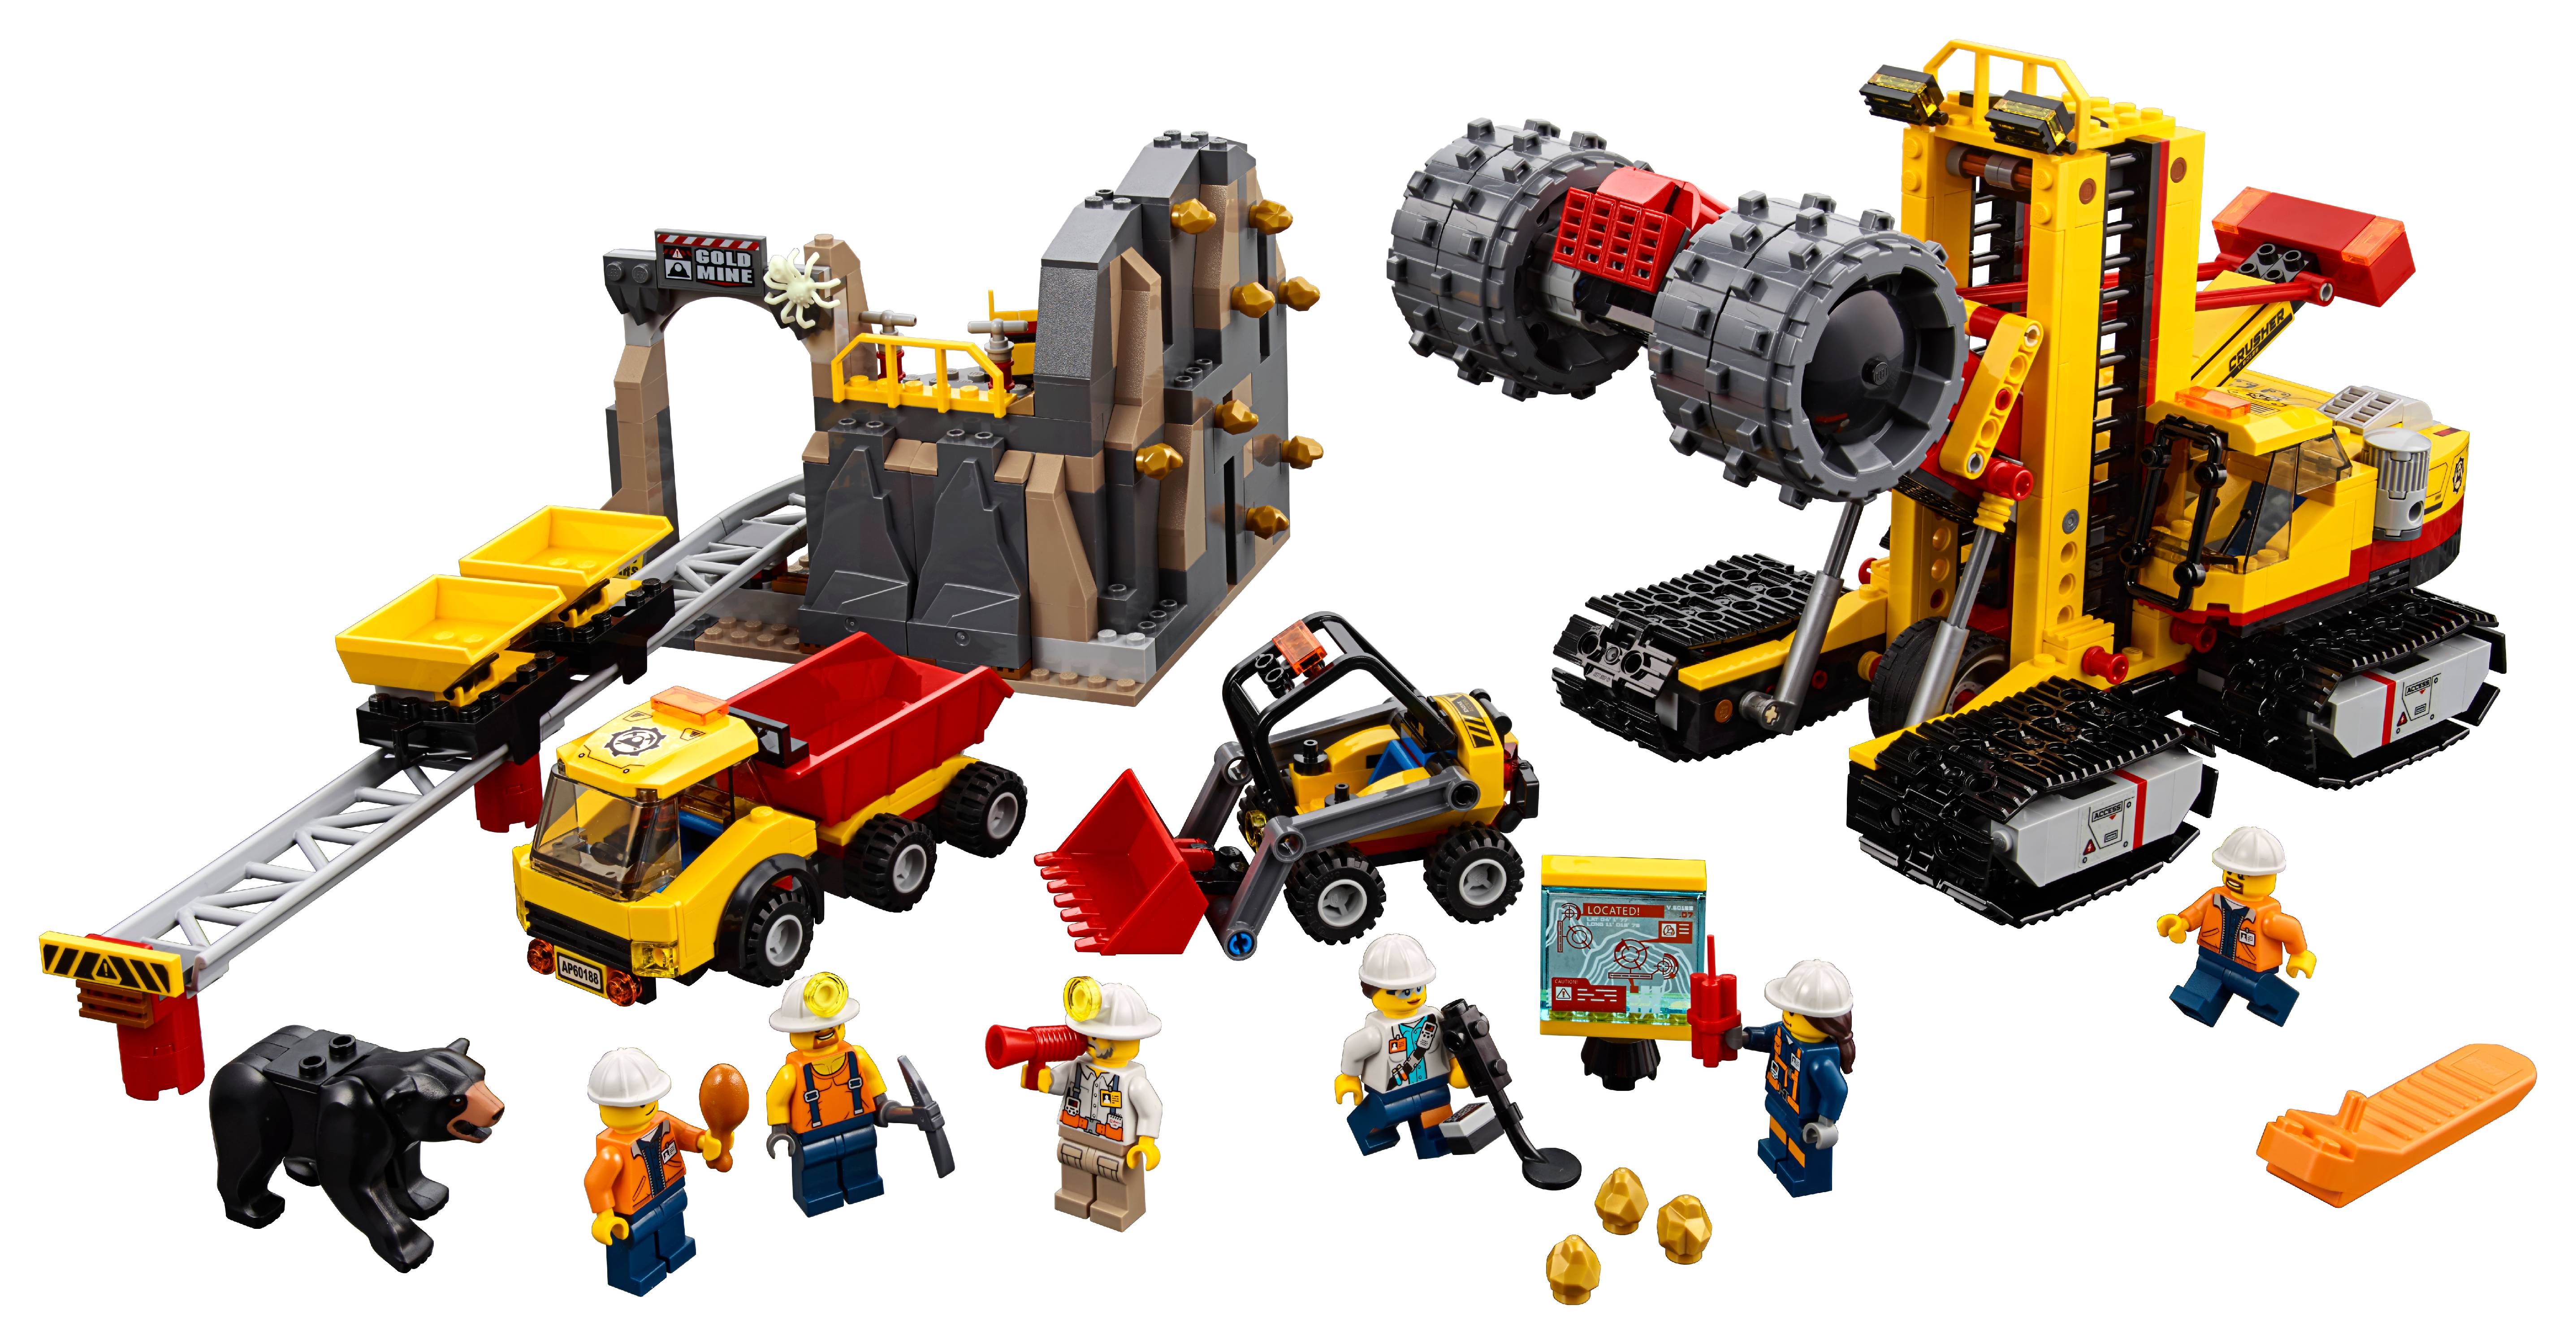 LEGO City Mining Experts Site 60188 Building Set (883 Pieces) - image 2 of 7